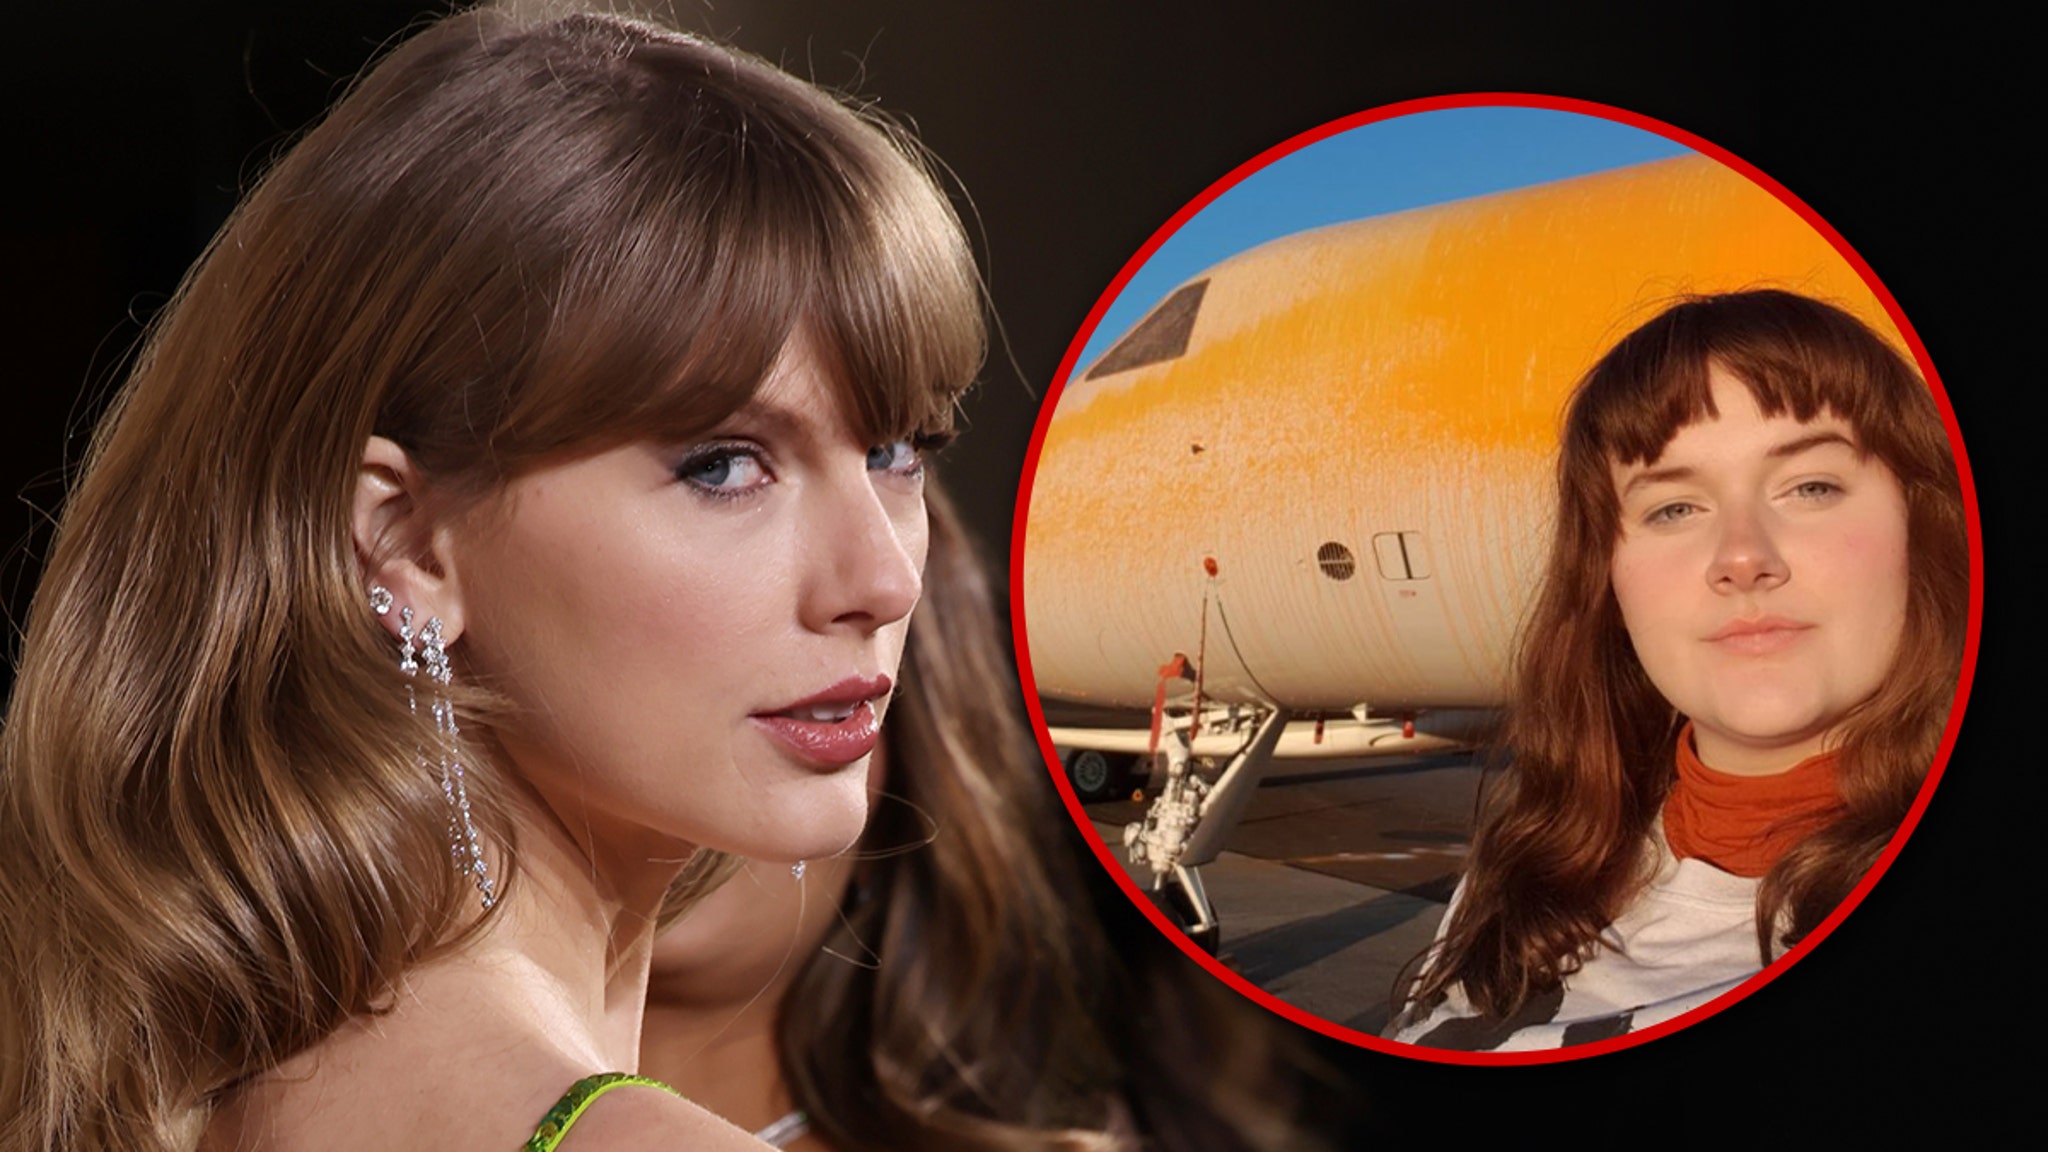 Taylor Swift's Private Jet Targeted by Oil Protesters, But Avoids Getting Hit